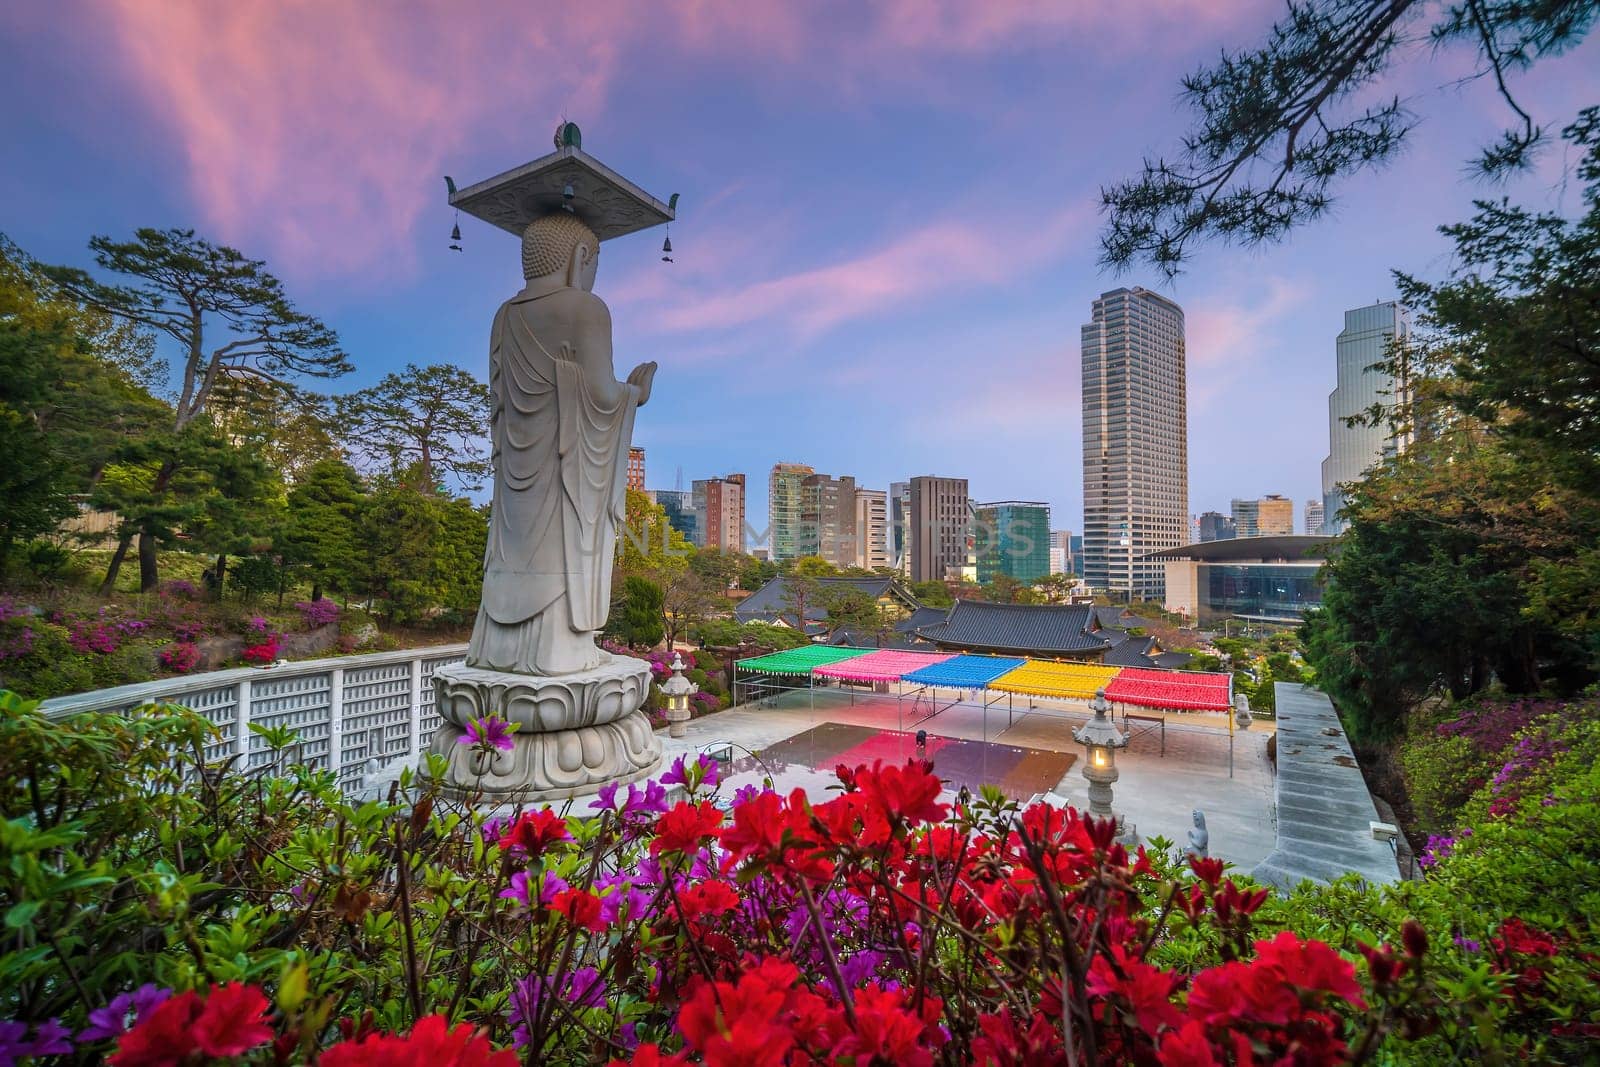 Bongeunsa Temple During the Summer in the Gangnam District of Seoul, South Kore by f11photo